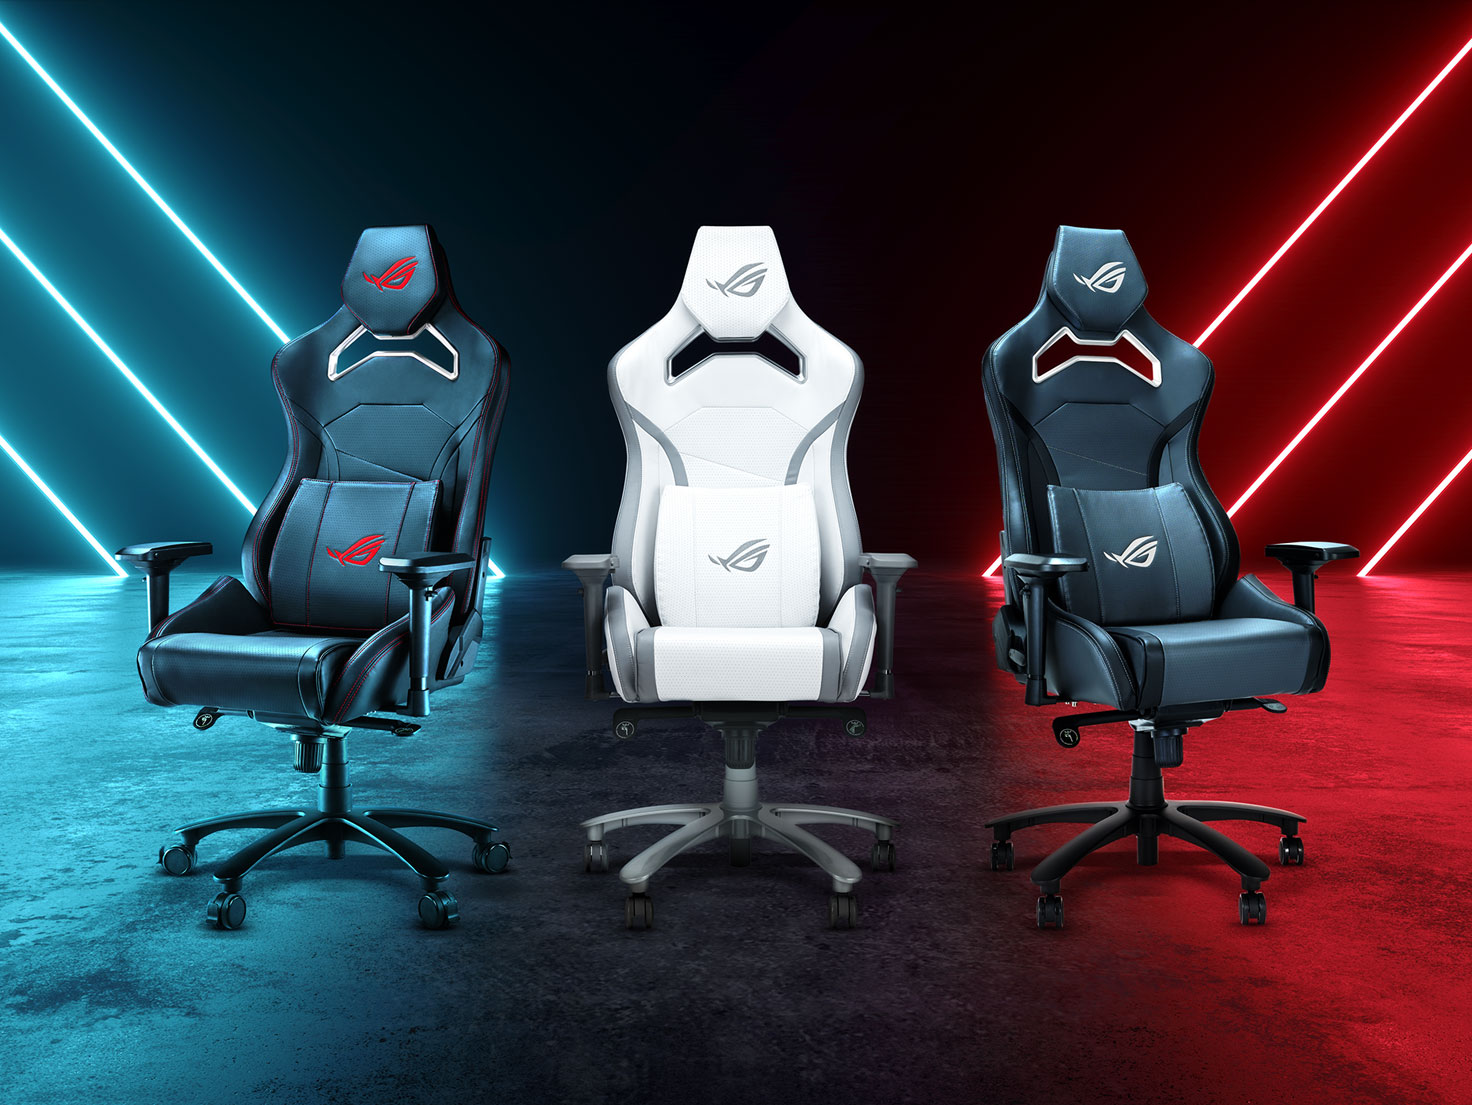 Three Chariot X Core gaming chair in black, gray, and white variations side by side.